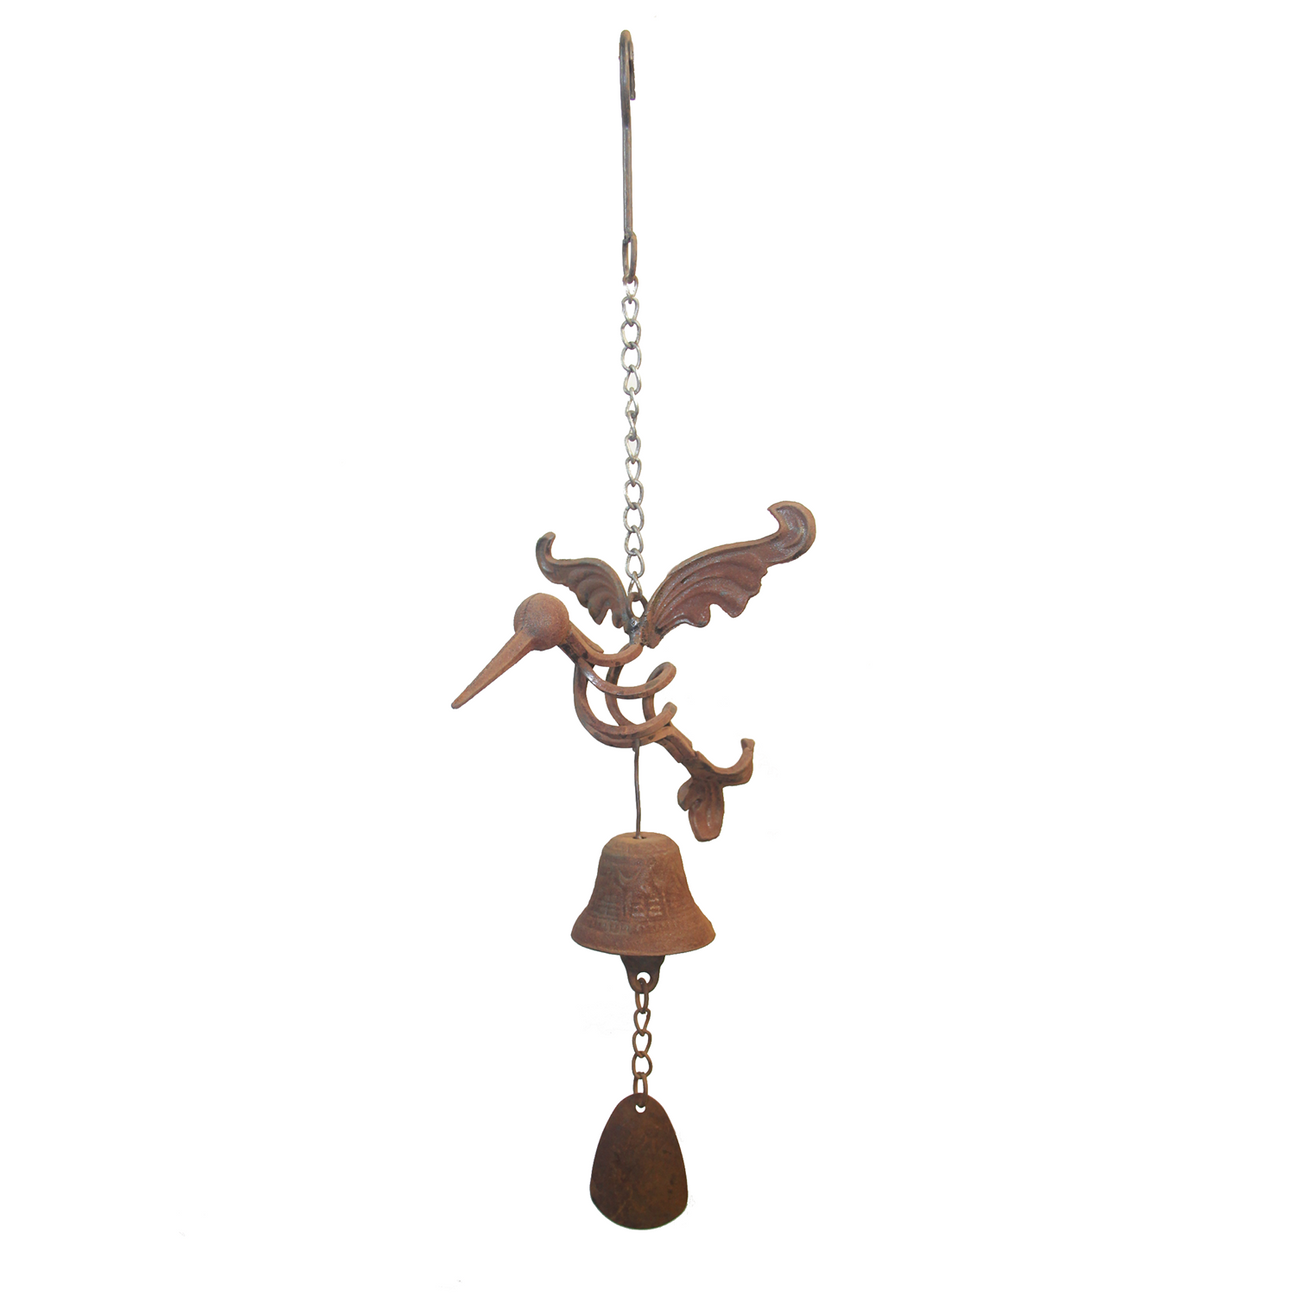 W3561Bell - Hanging hummingbird with bell - Natural Rusted